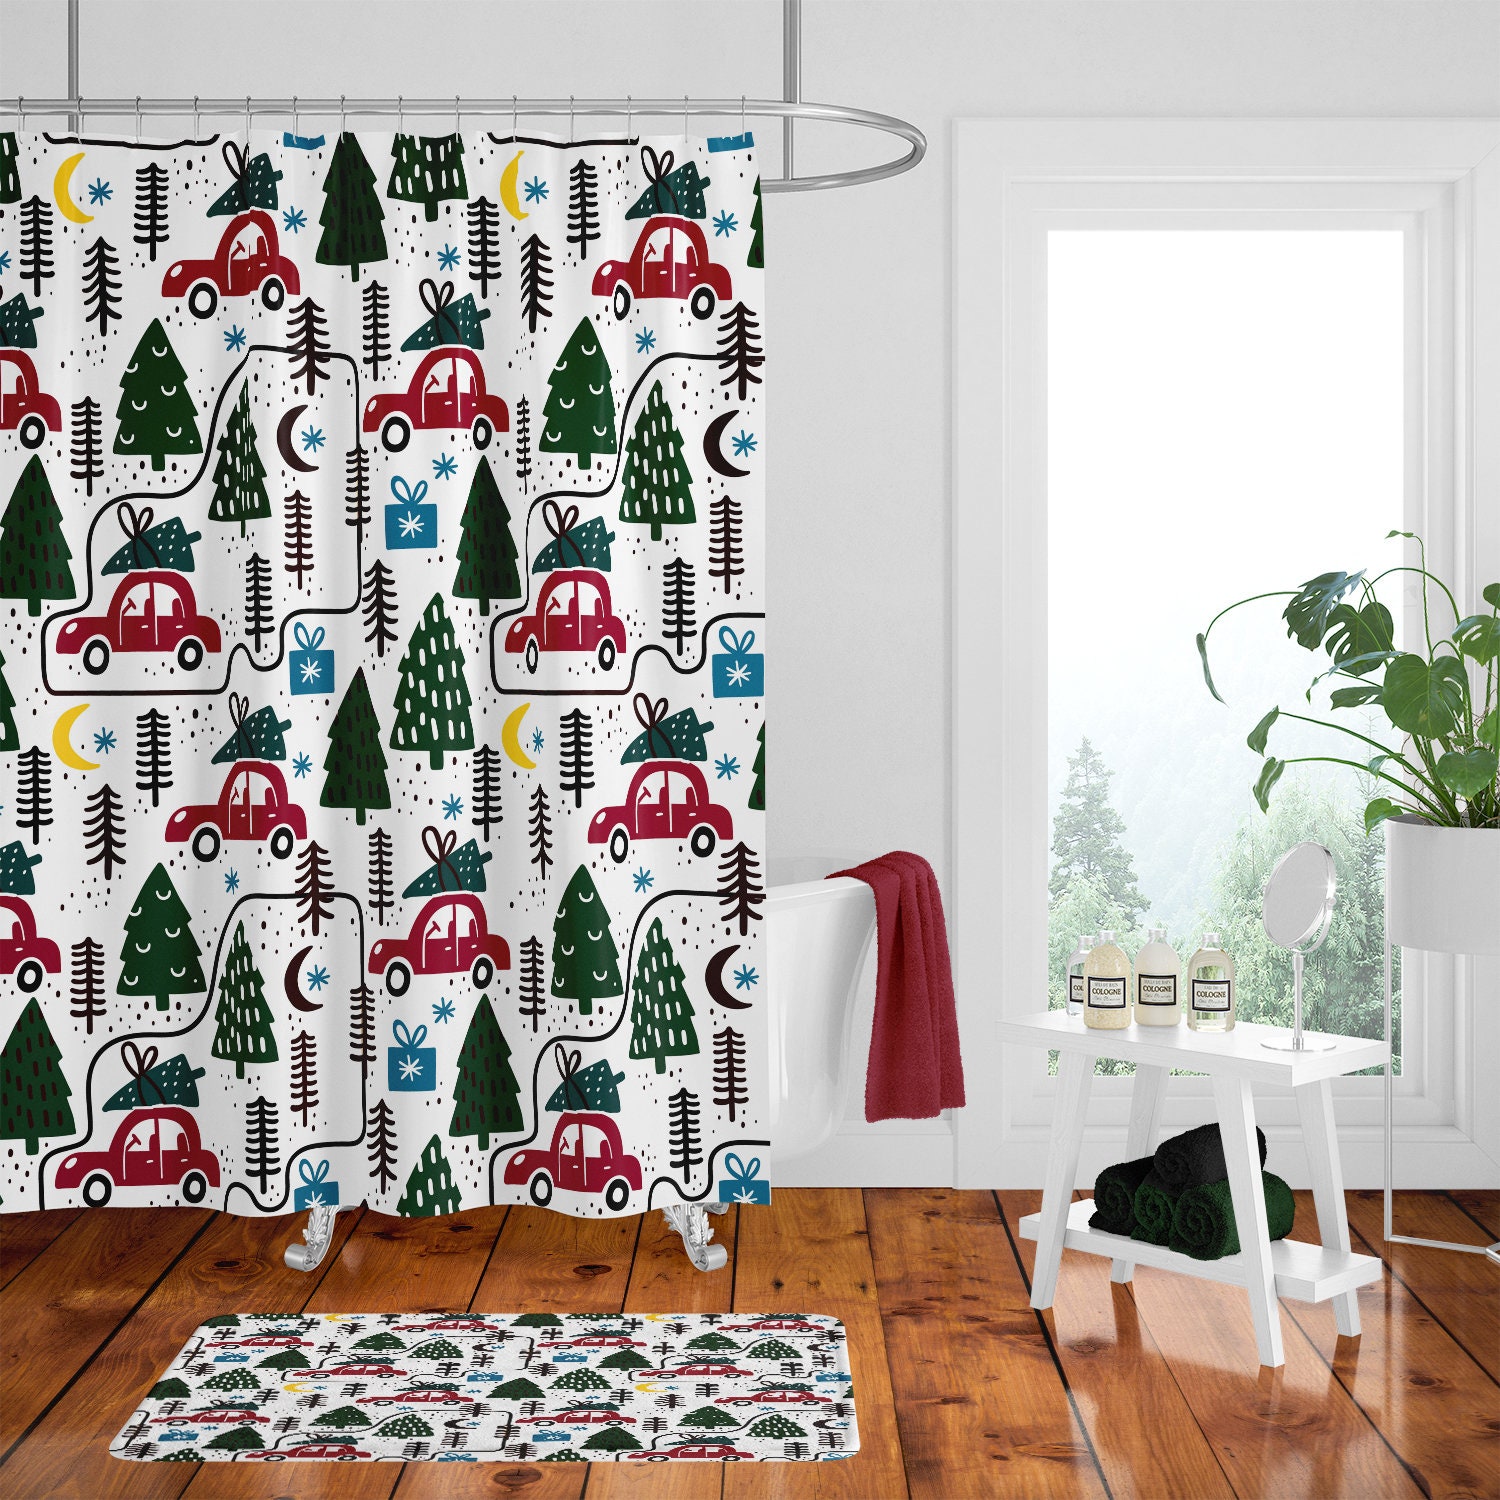 Details about   Red Retro Car With Christmas Tree Vintage Shower Curtain Set Bathroom Decor 72“ 